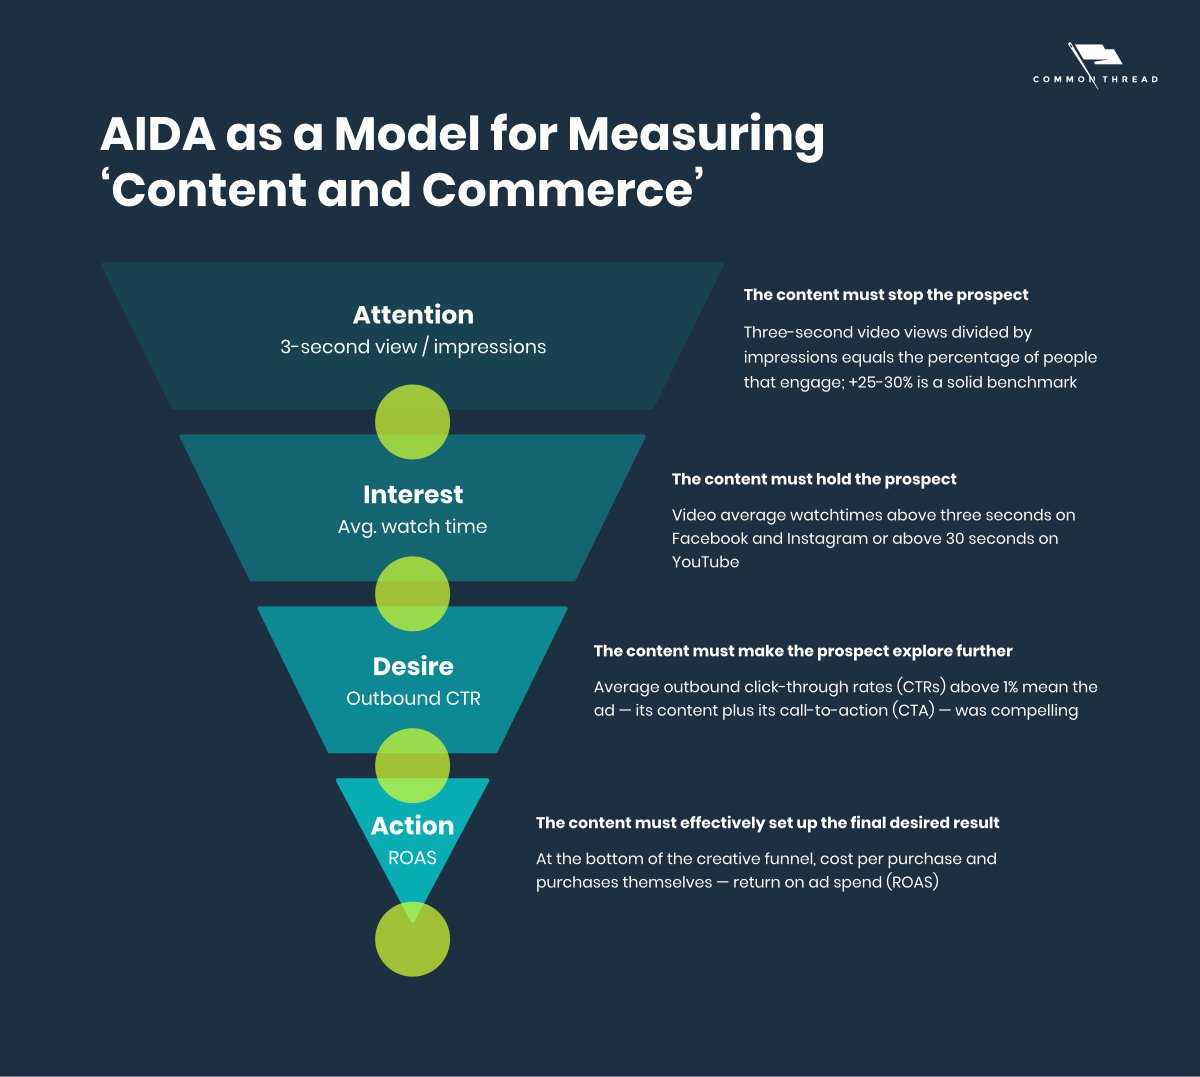 7/ Creative strategy here is an absolute must. Developing ads for the sake of developing ads doesn't work. Having a system for understanding why creative is working so you can stack learnings, does work. Introduce the AIDA framework - Attention, Interest, Desire, Action